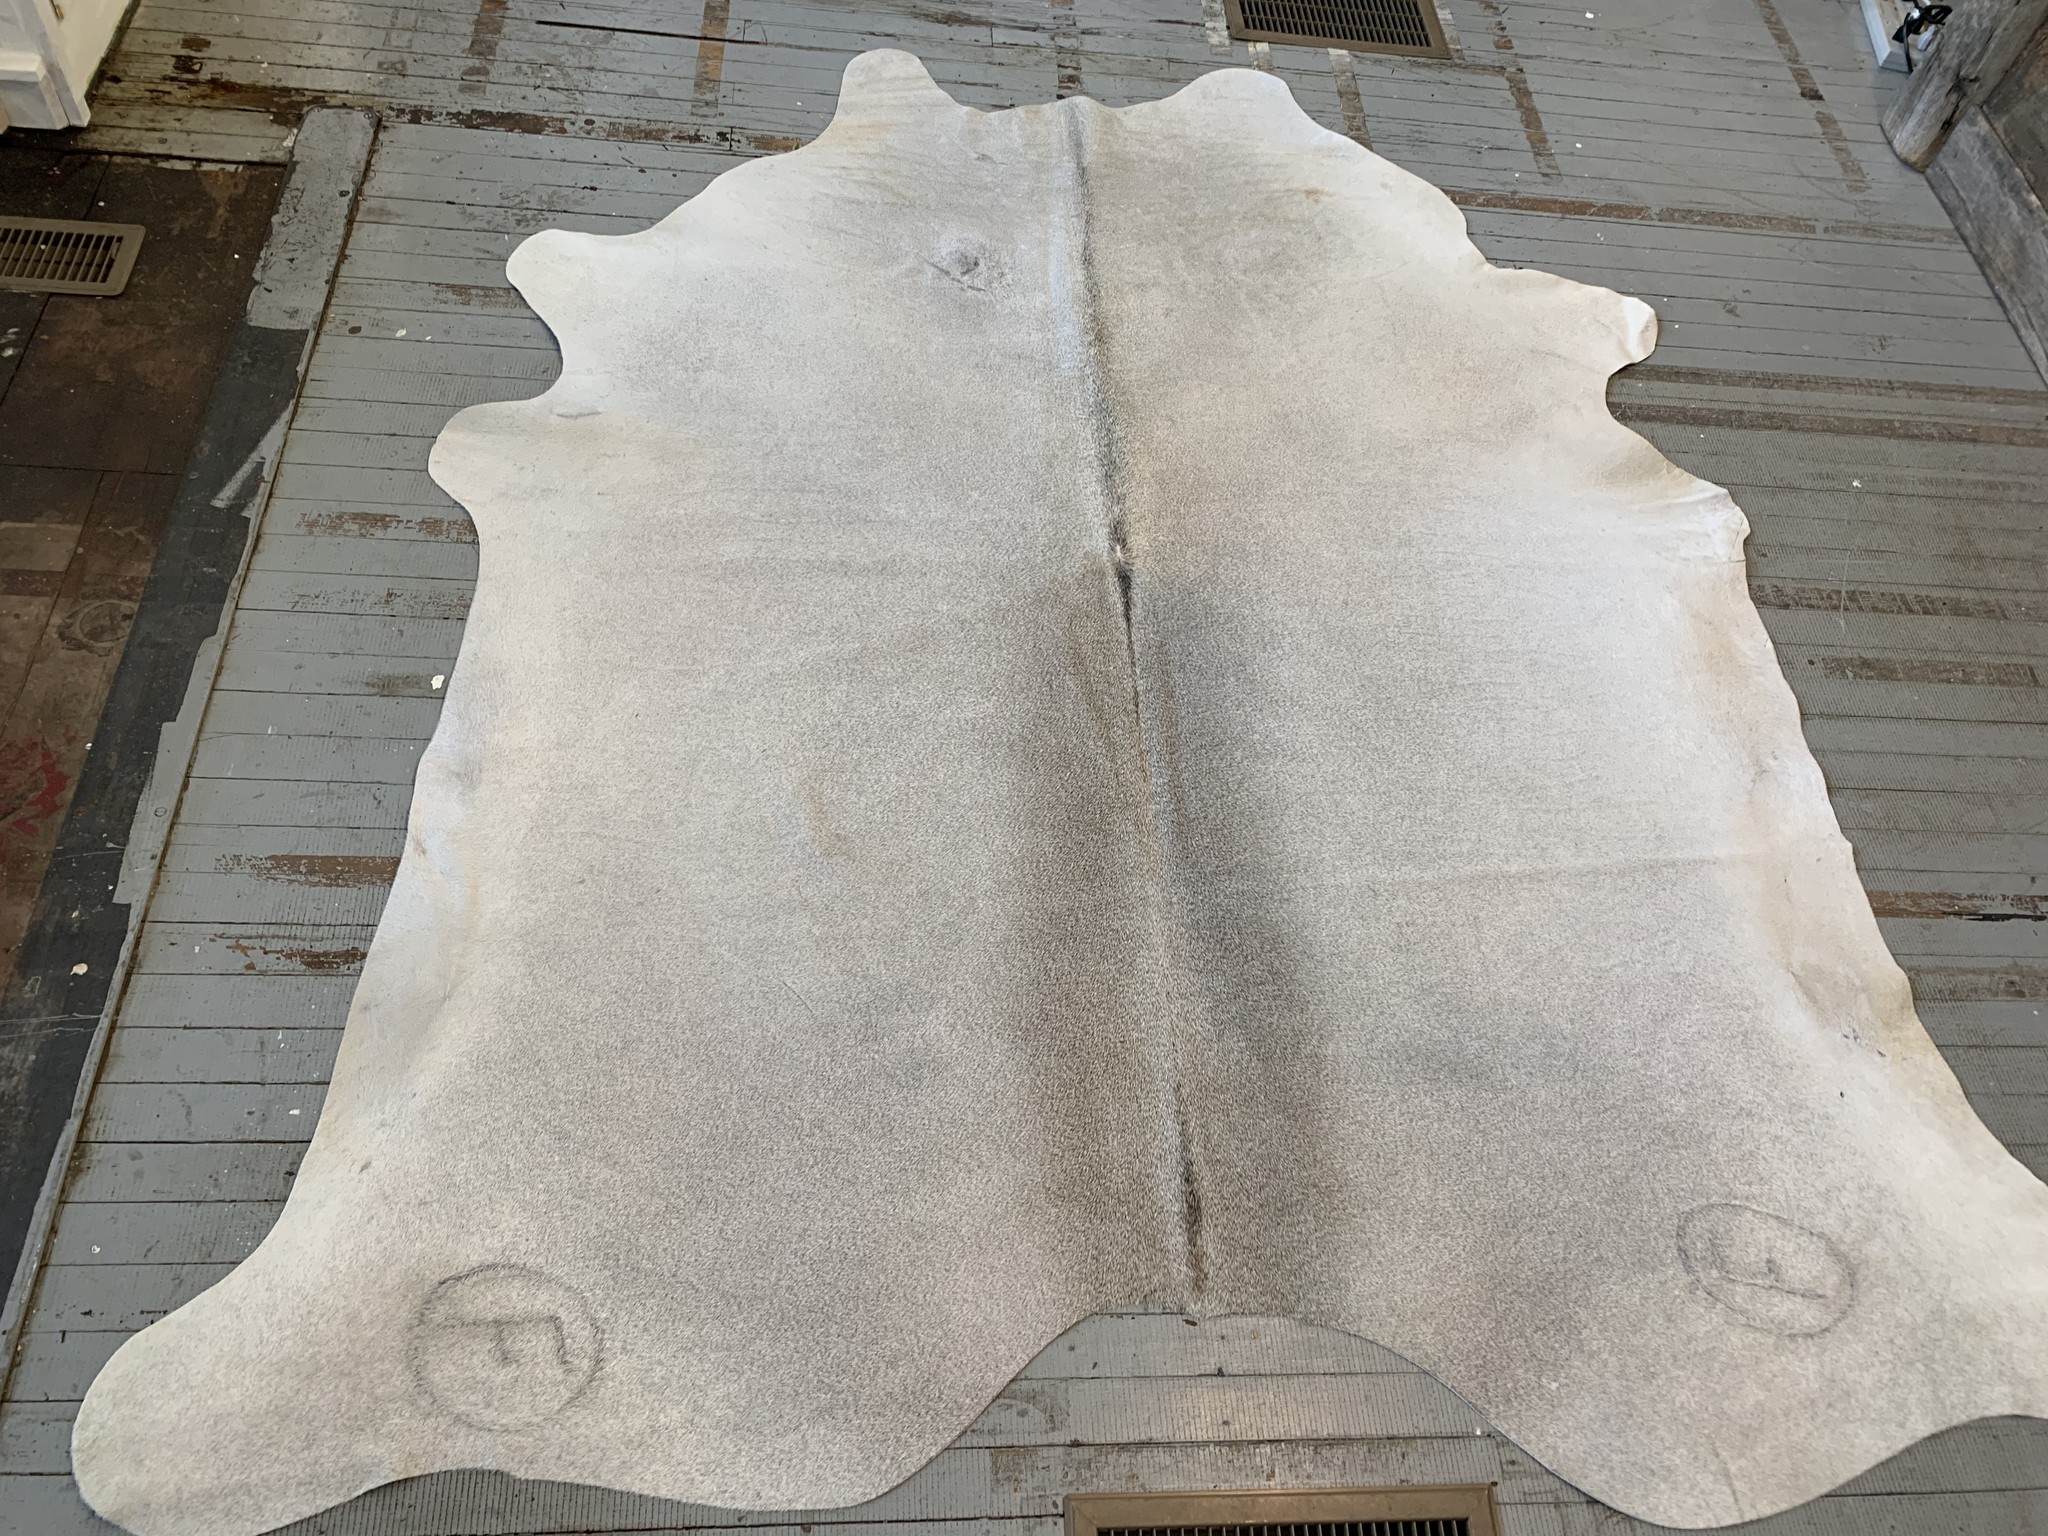 Gray Cowhide Rug With Matching F Brands From Cactus Creek Ships